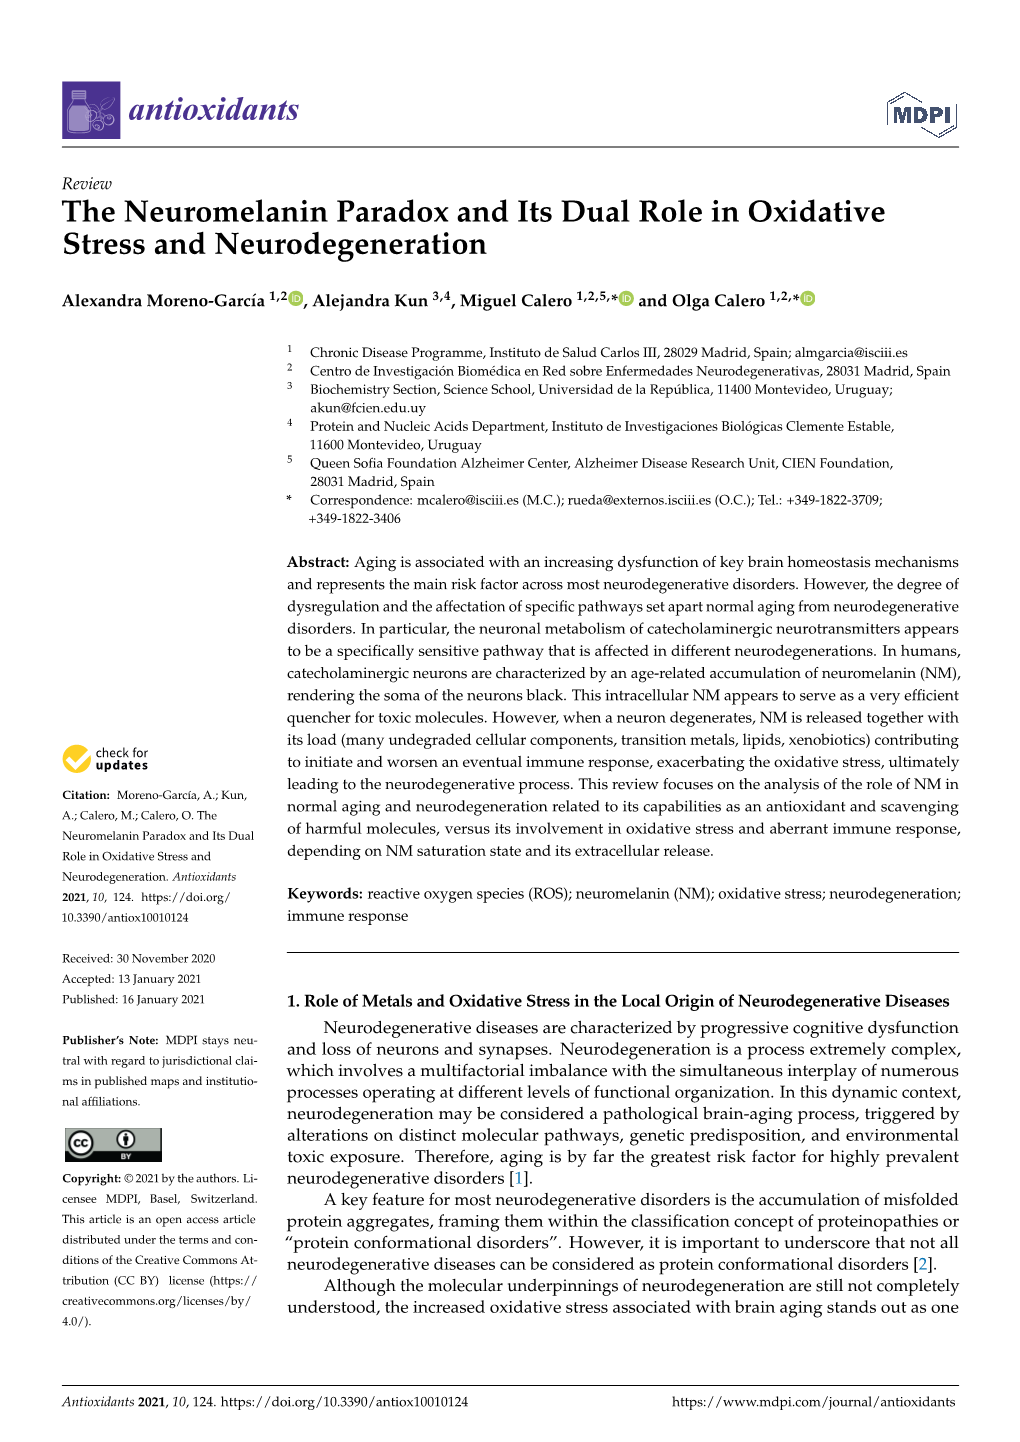 The Neuromelanin Paradox and Its Dual Role in Oxidative Stress and Neurodegeneration